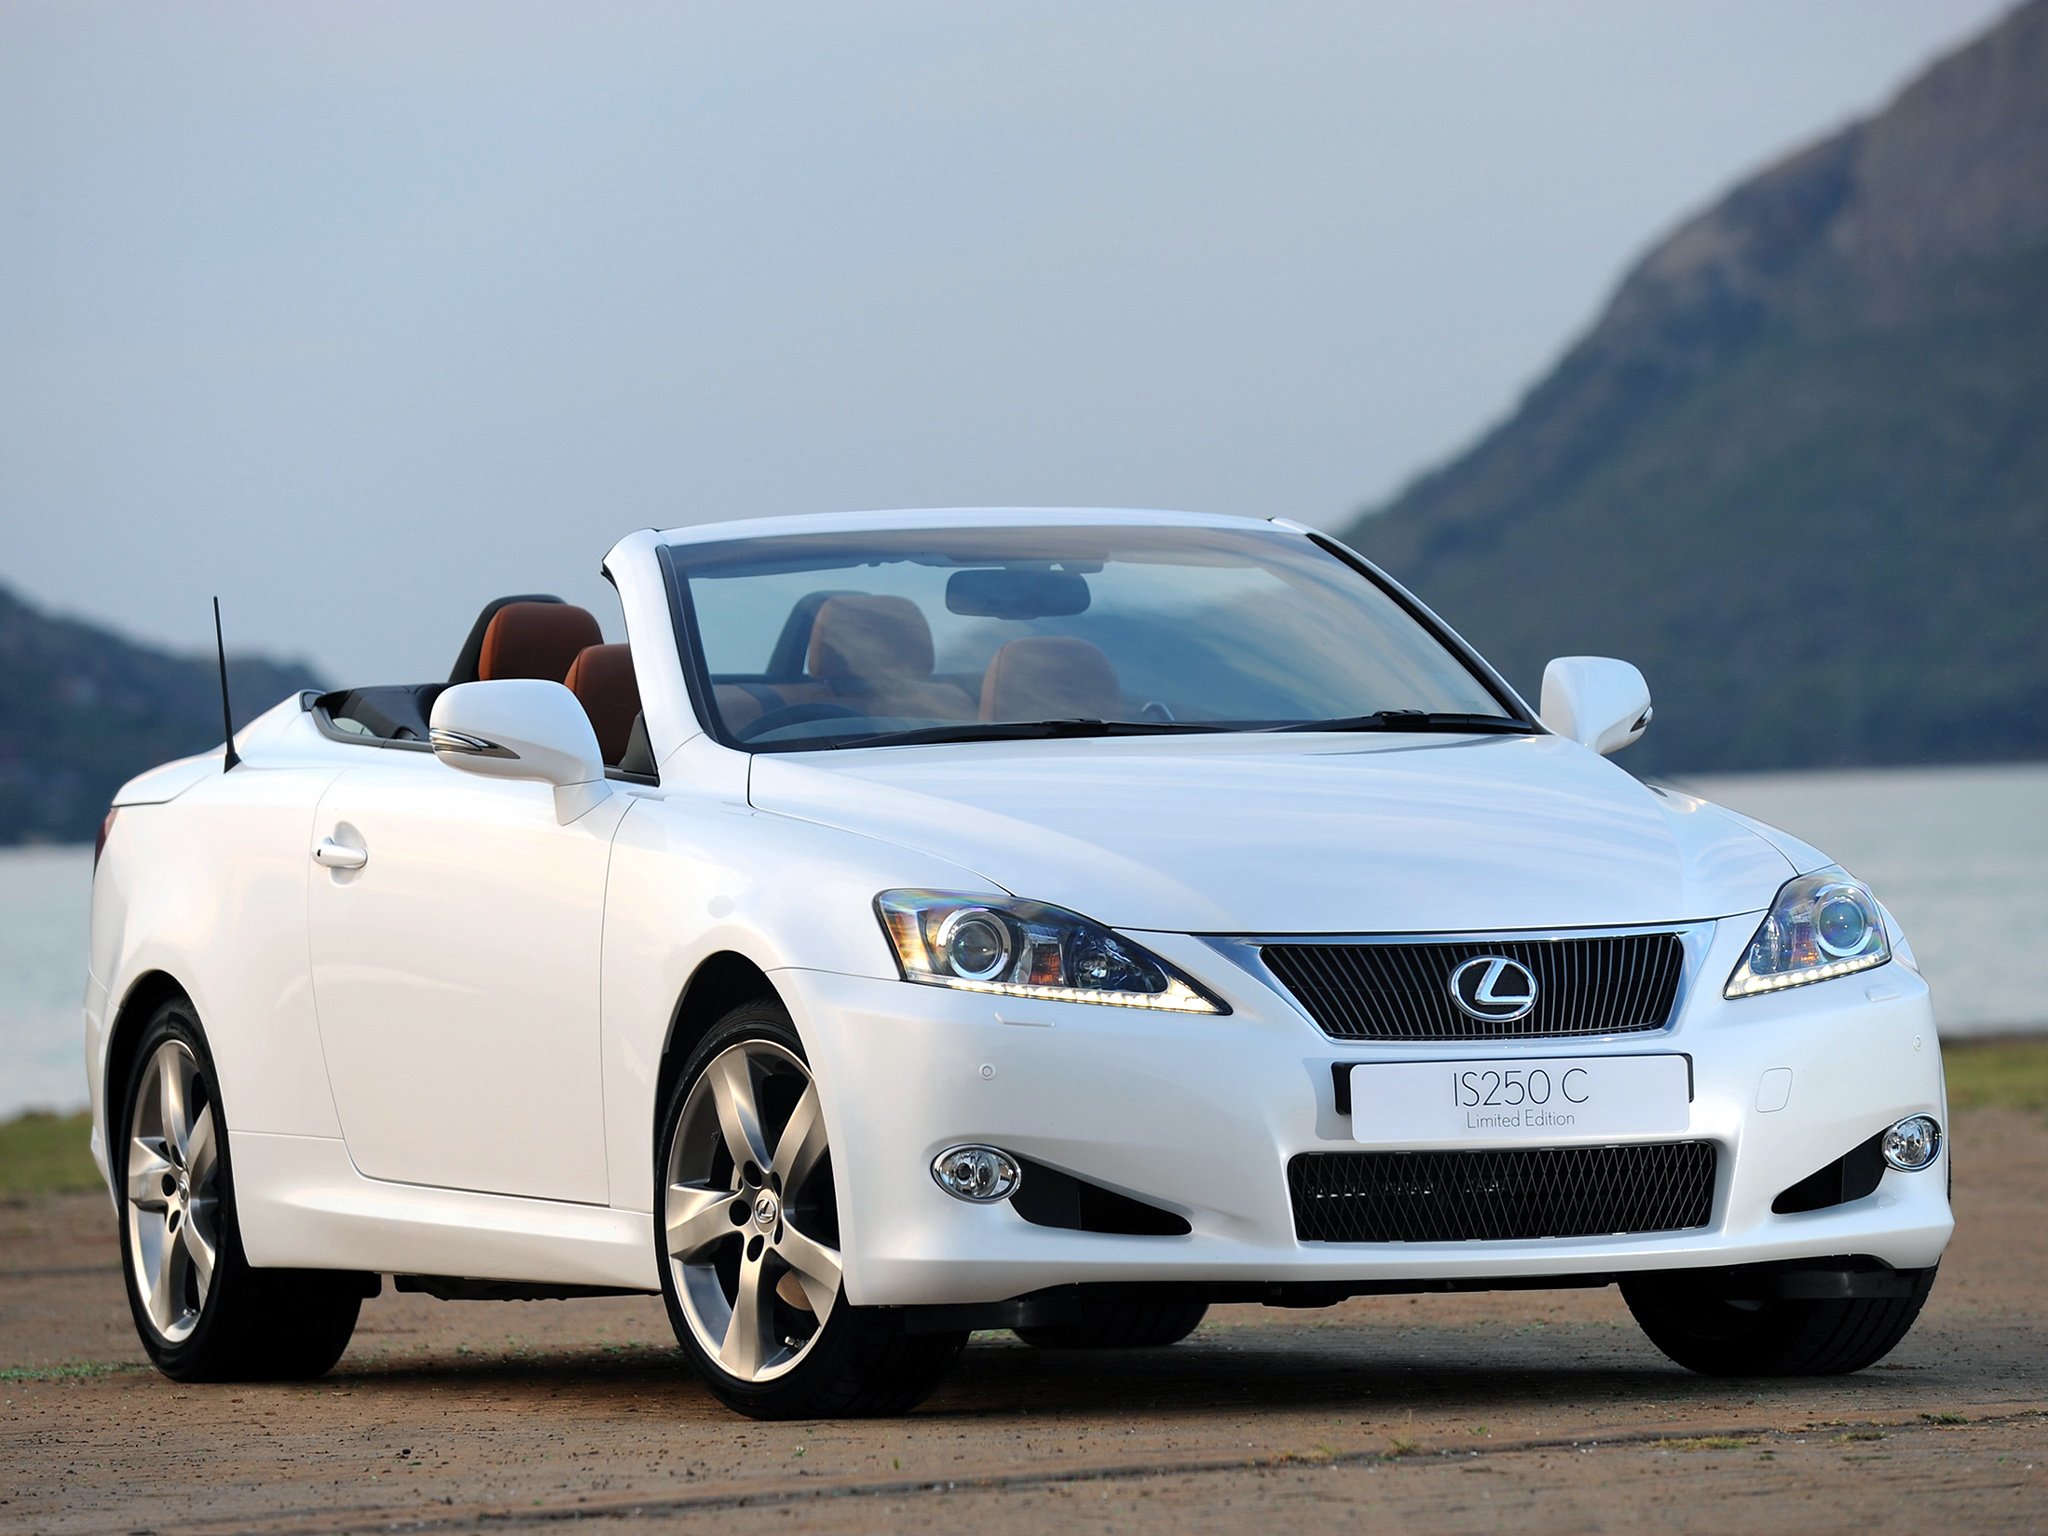 C a limited. Лексус is250c. Лексус is 250 c. Lexus is 250c. Lexus is250c кабриолет.